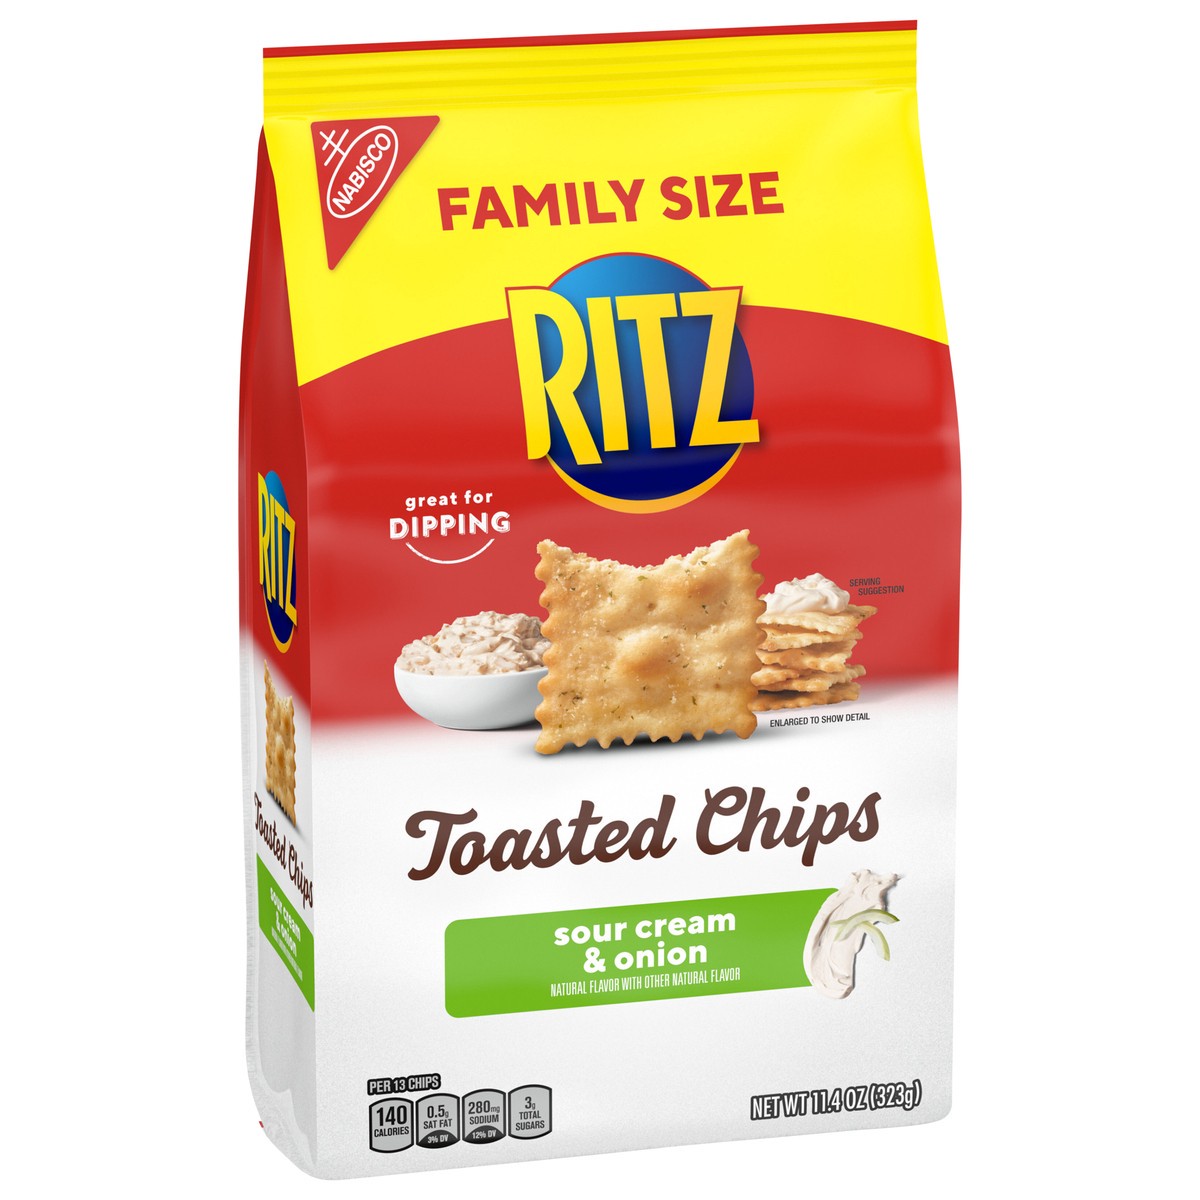 slide 2 of 9, RITZ Toasted Chips Sour Cream and Onion Crackers, Family Size, 11.4 oz, 11.41 oz